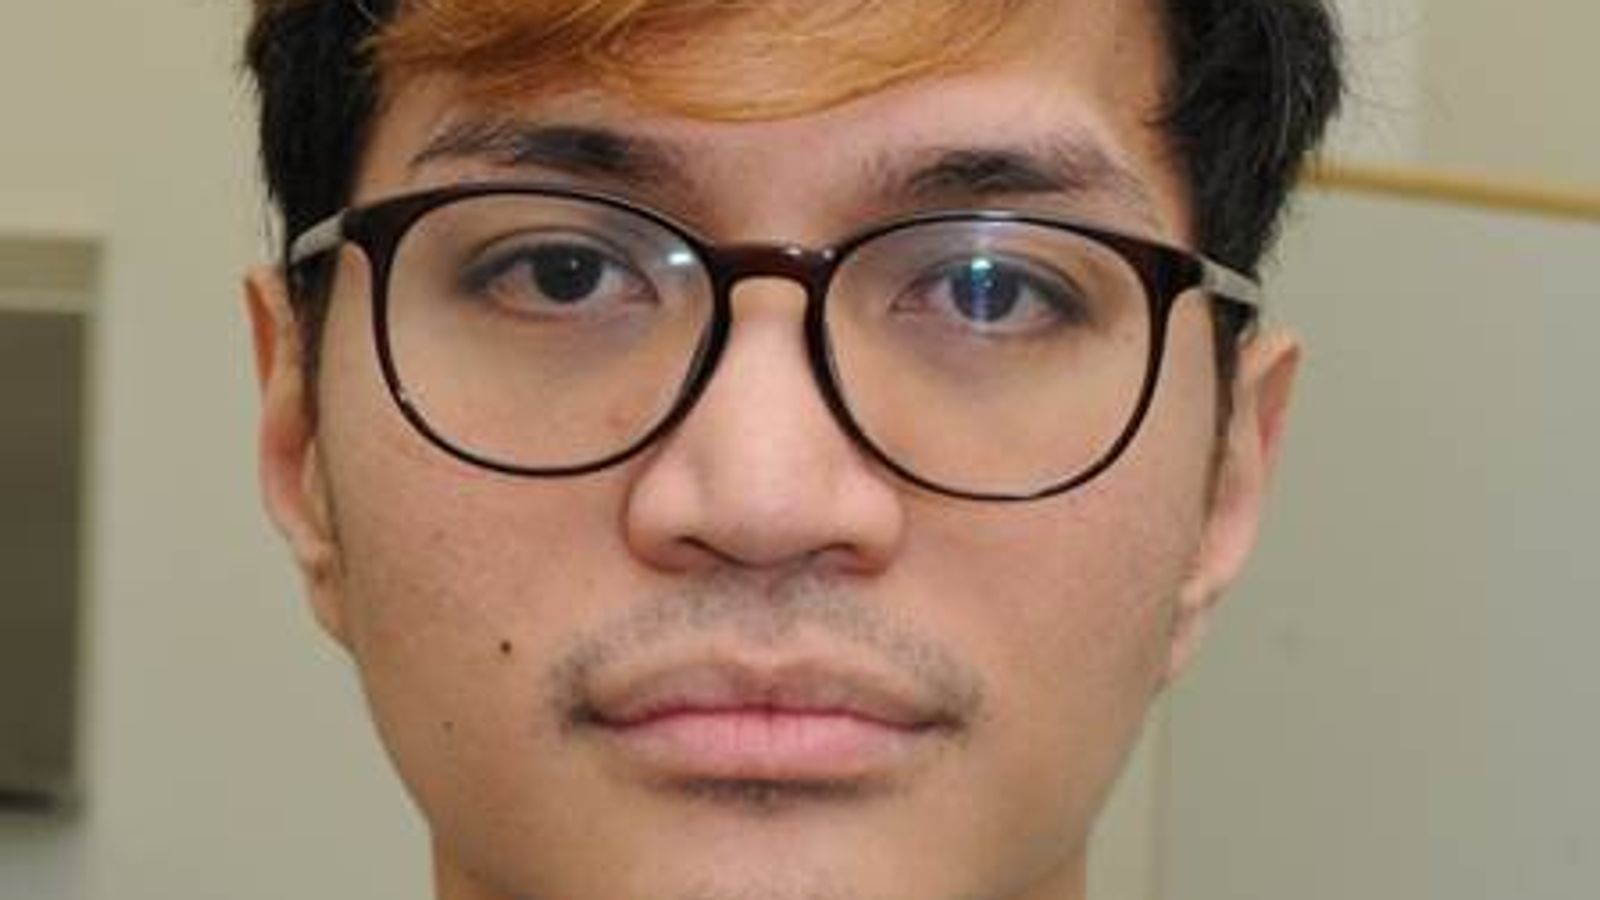 Gay Rapist Reynhard Sinaga Gets Life Sentence For 159 Offences Against 48 Men; Sexist Organisation “Rape Crisis” Fail To Acknowledge Men’s Difficulties In Reporting Being Raped